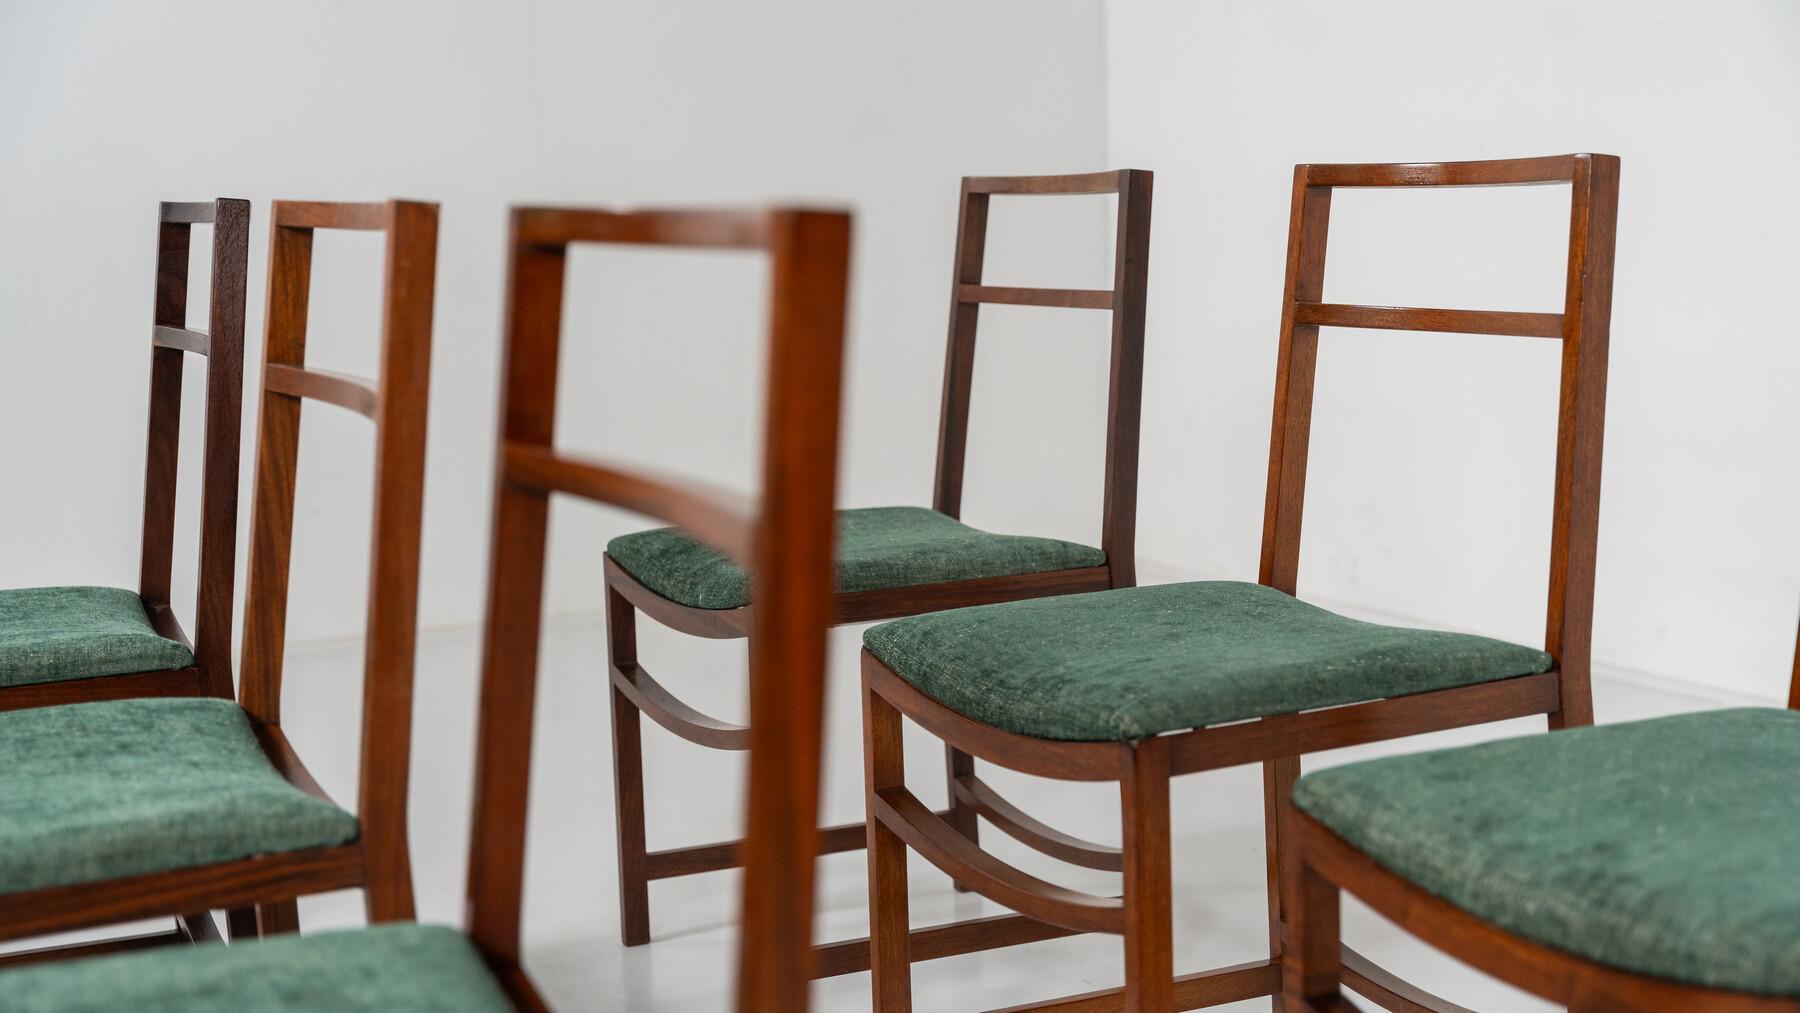 Set of 8 Mid-Century Modern Dining Chairs by Renato Venturi for MIM, 1950s For Sale 4